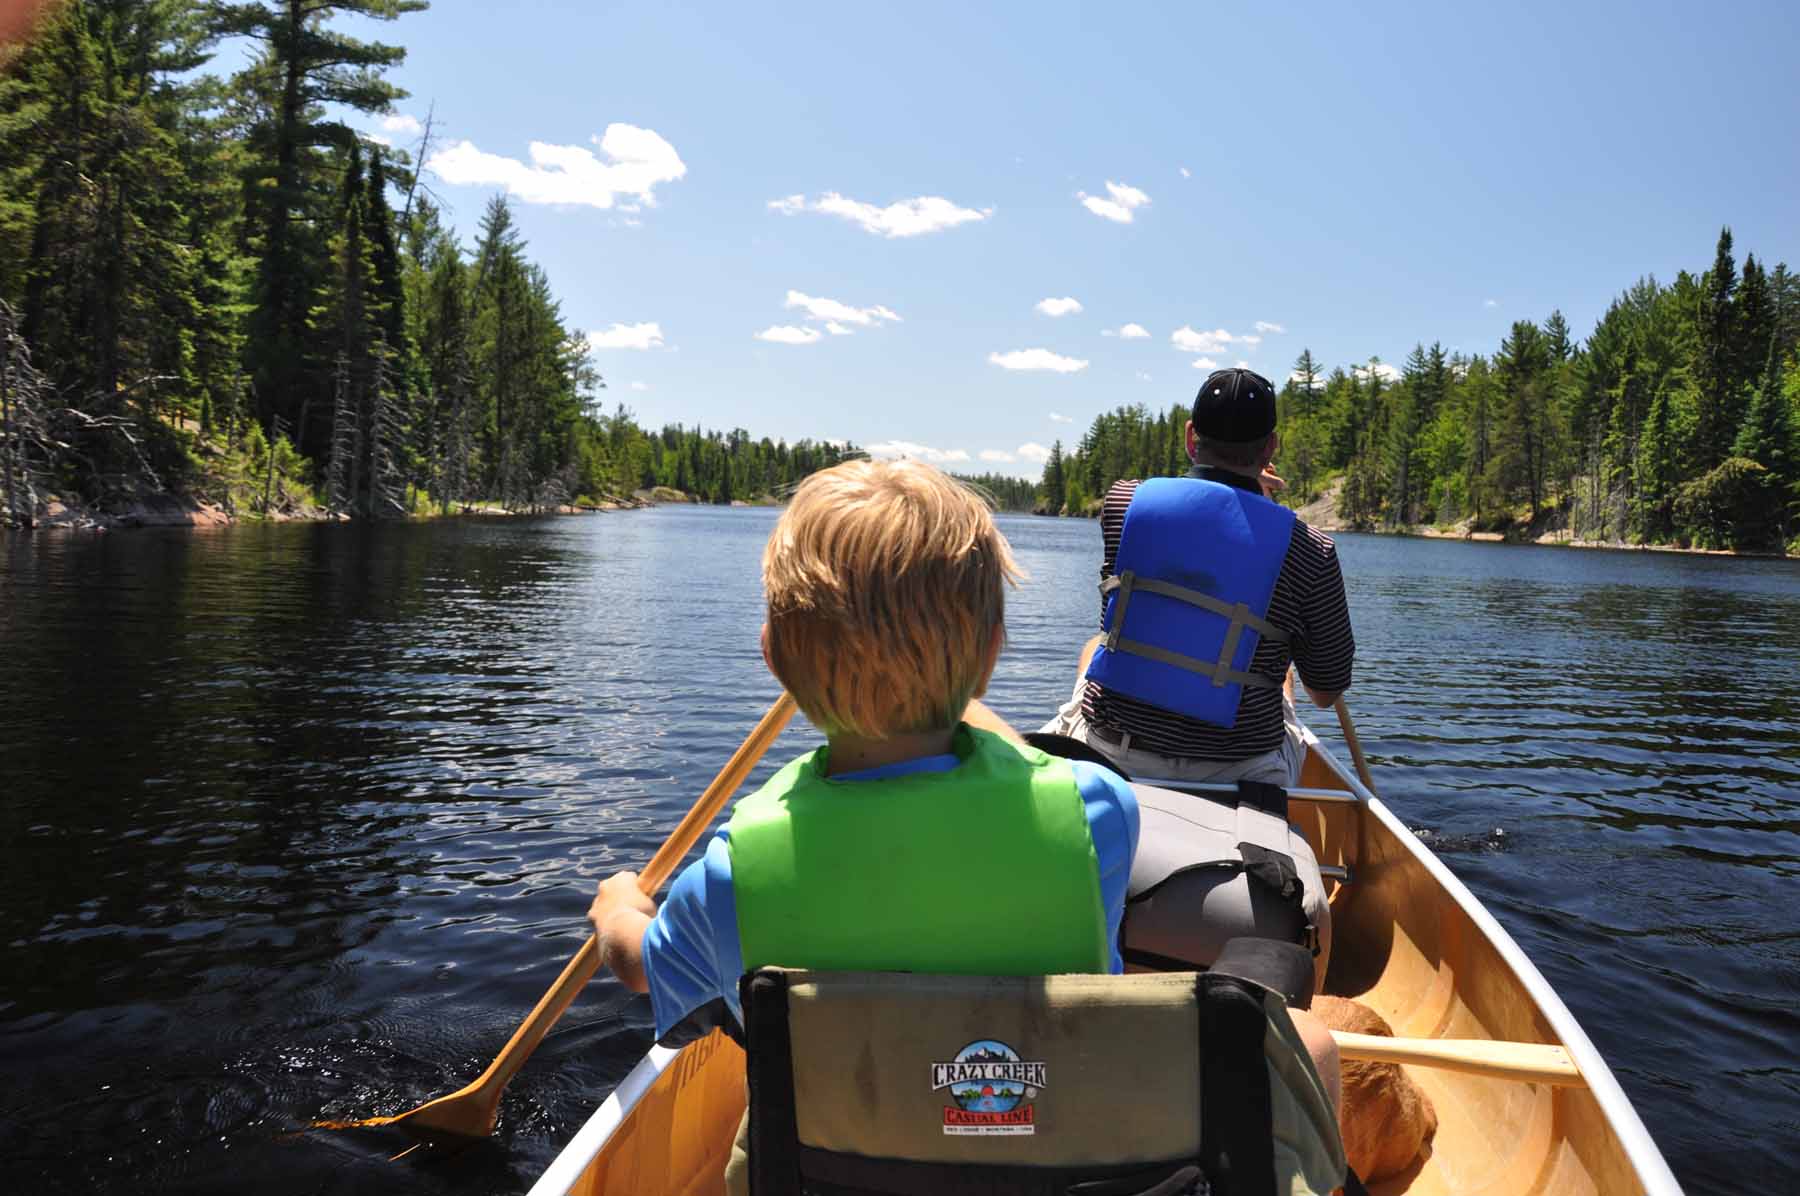 A kid and an adult paddle a canoe while social distancing in the Boundary Waters Canoe Area Wilderness.